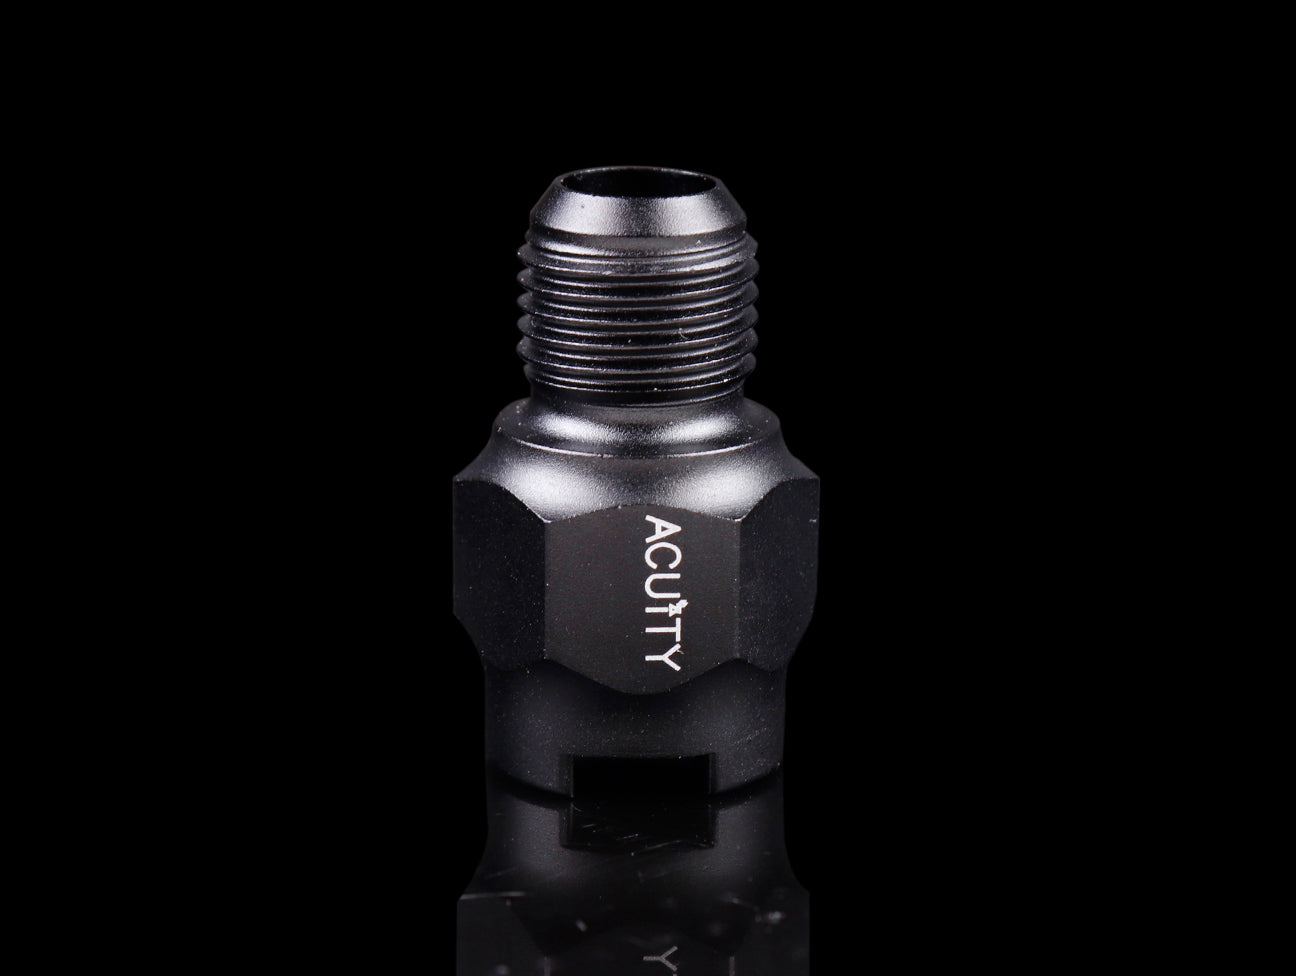 Acuity 1/4" SAE Quick Connect to -6AN Adapter